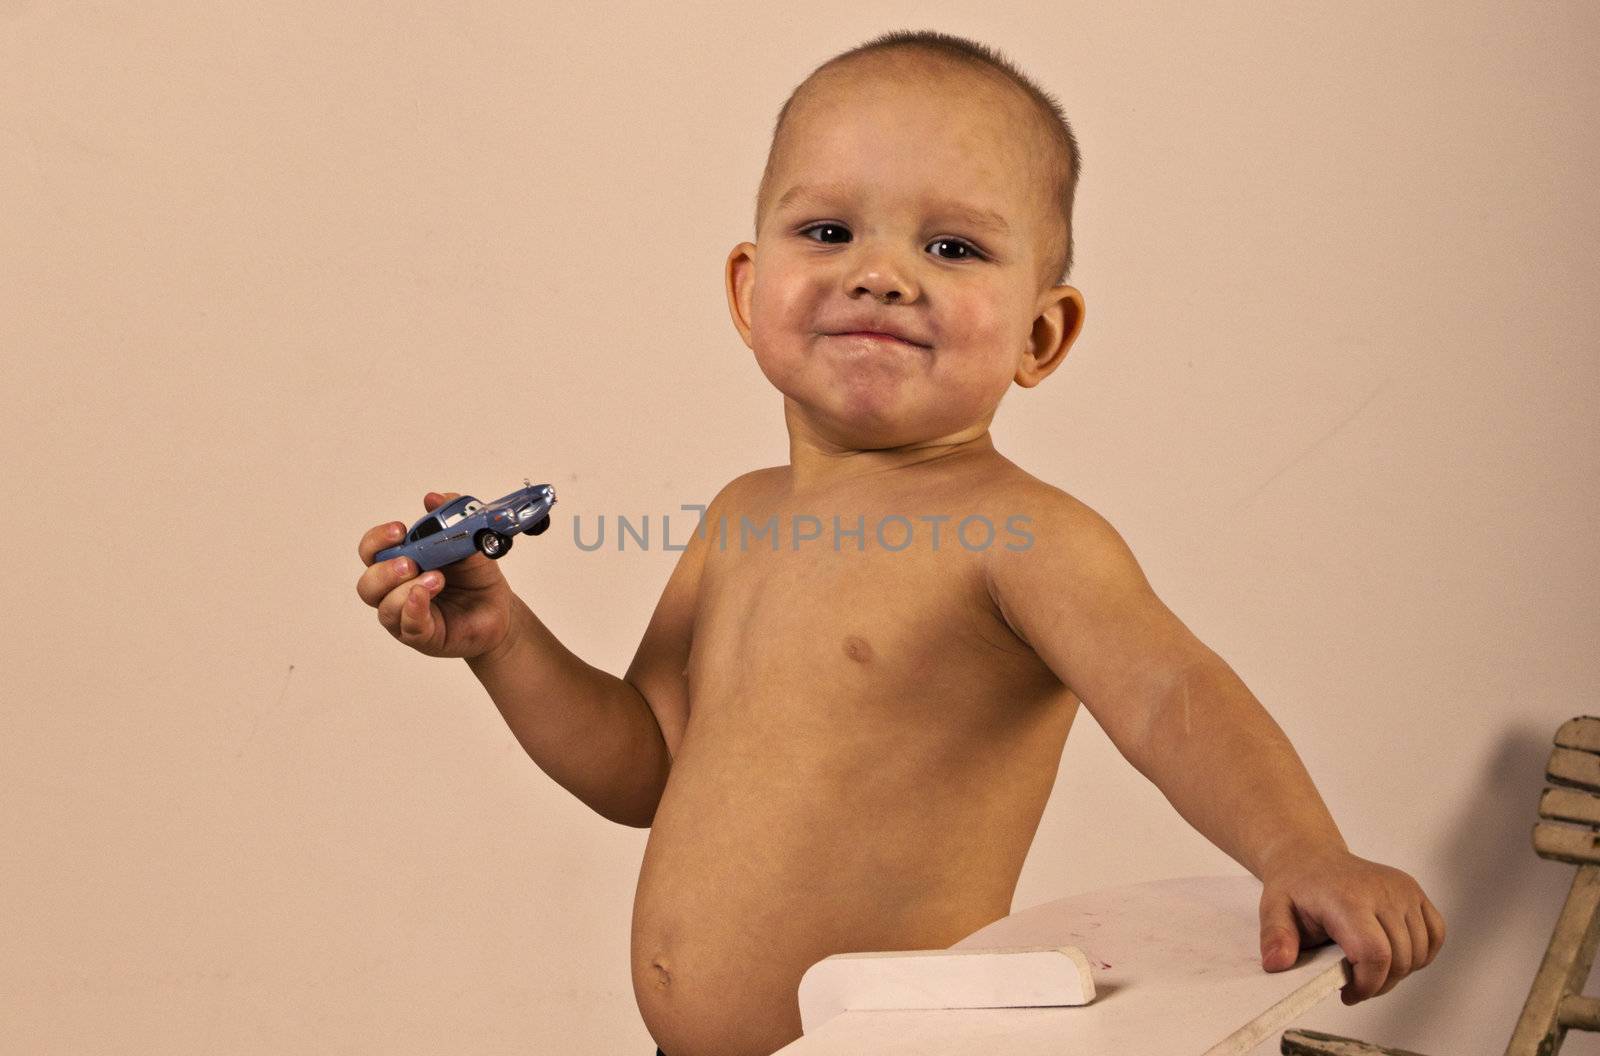 little bou is holding a toy car in his hand, and he is very proud of that.